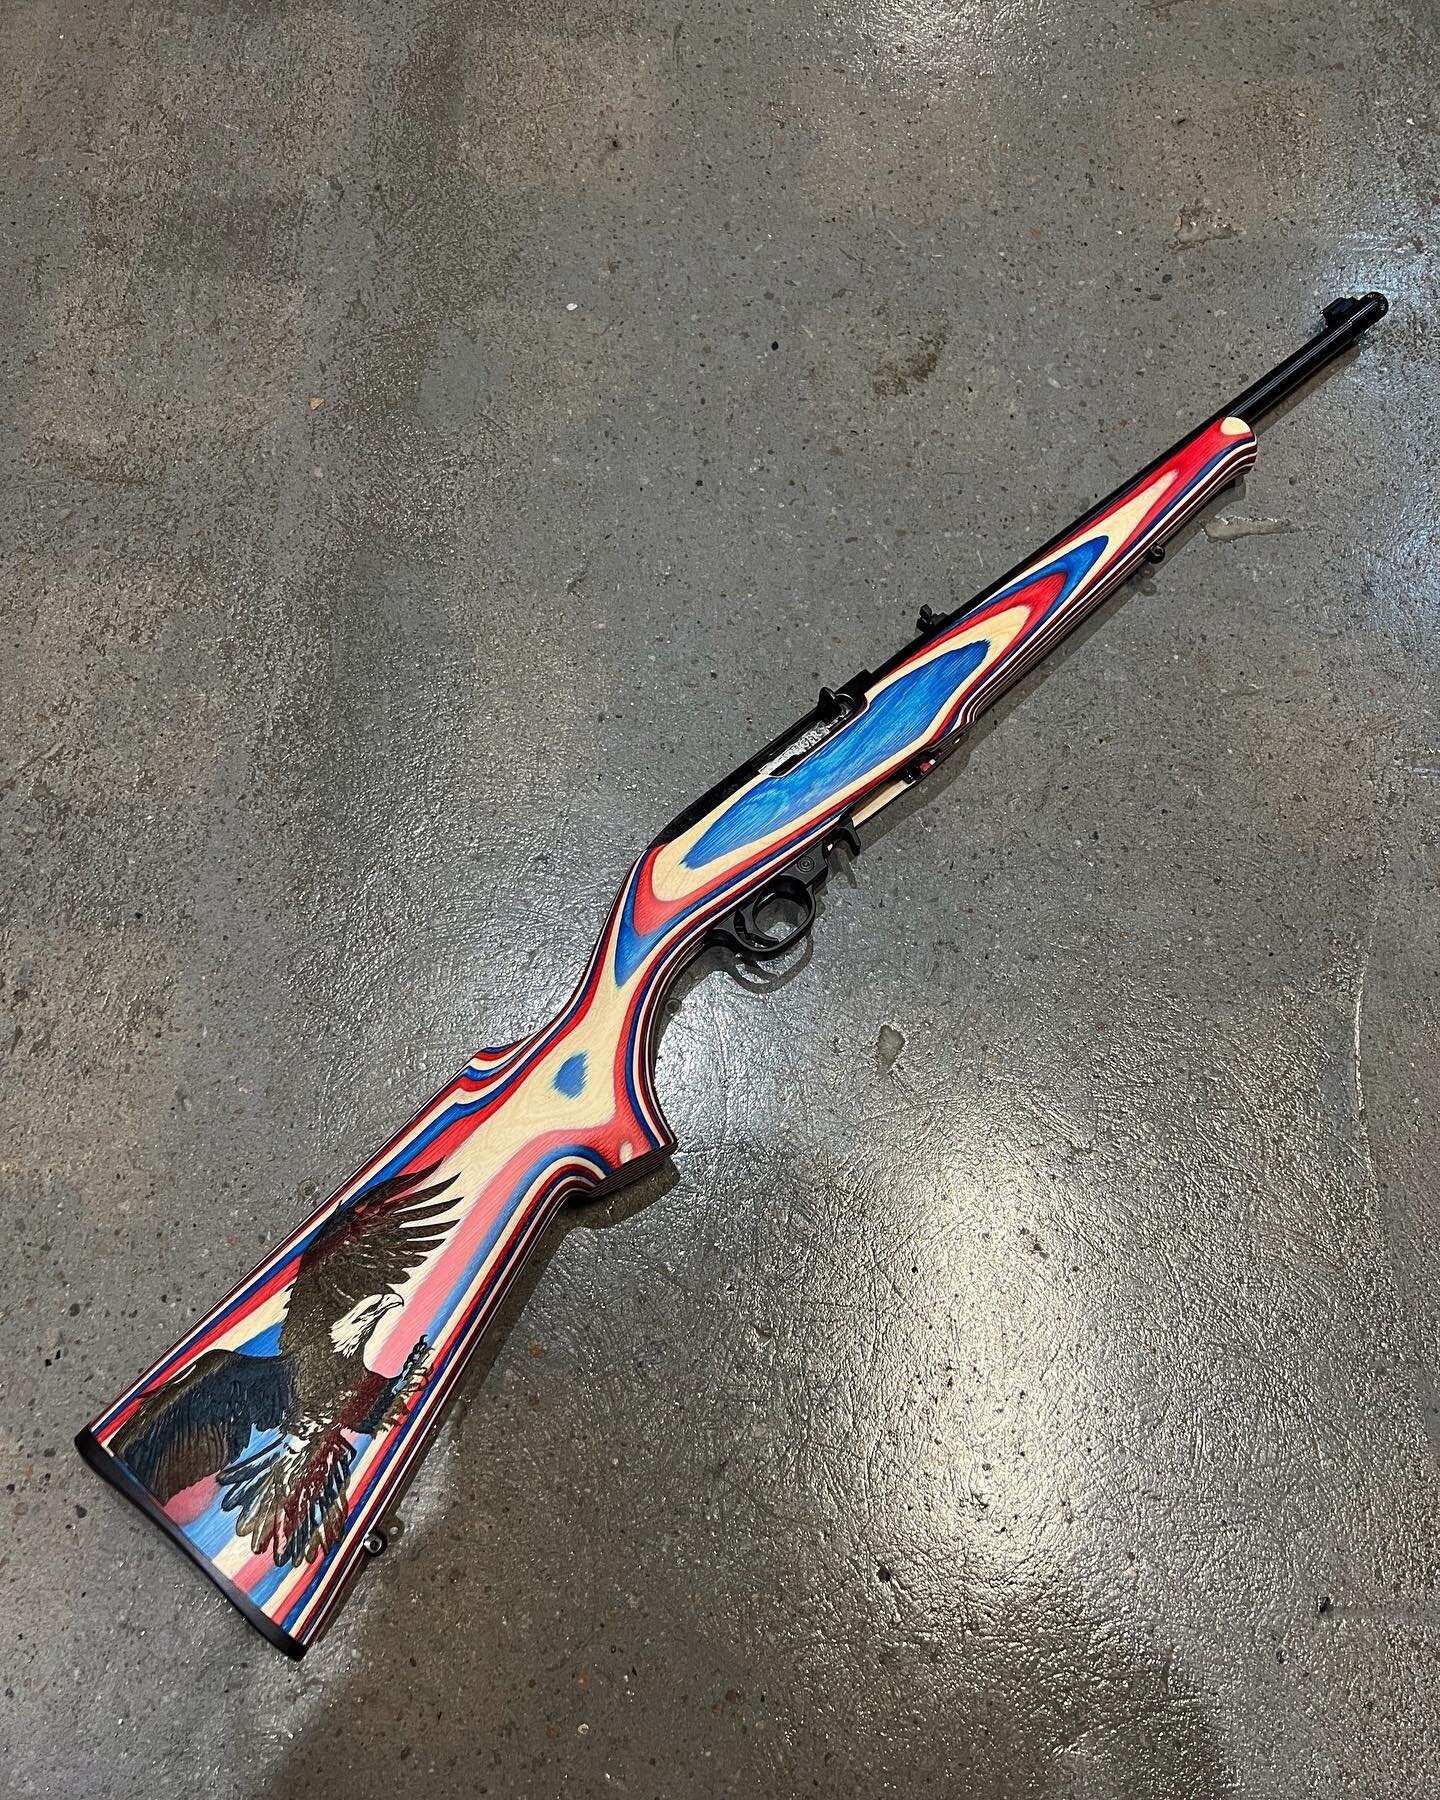 NEW IN STOCK (limited quantity): @rugersofficial 10/22 USA Shooting 2021 Eagle TALO Edition 🇺🇸 #royalrangeusa